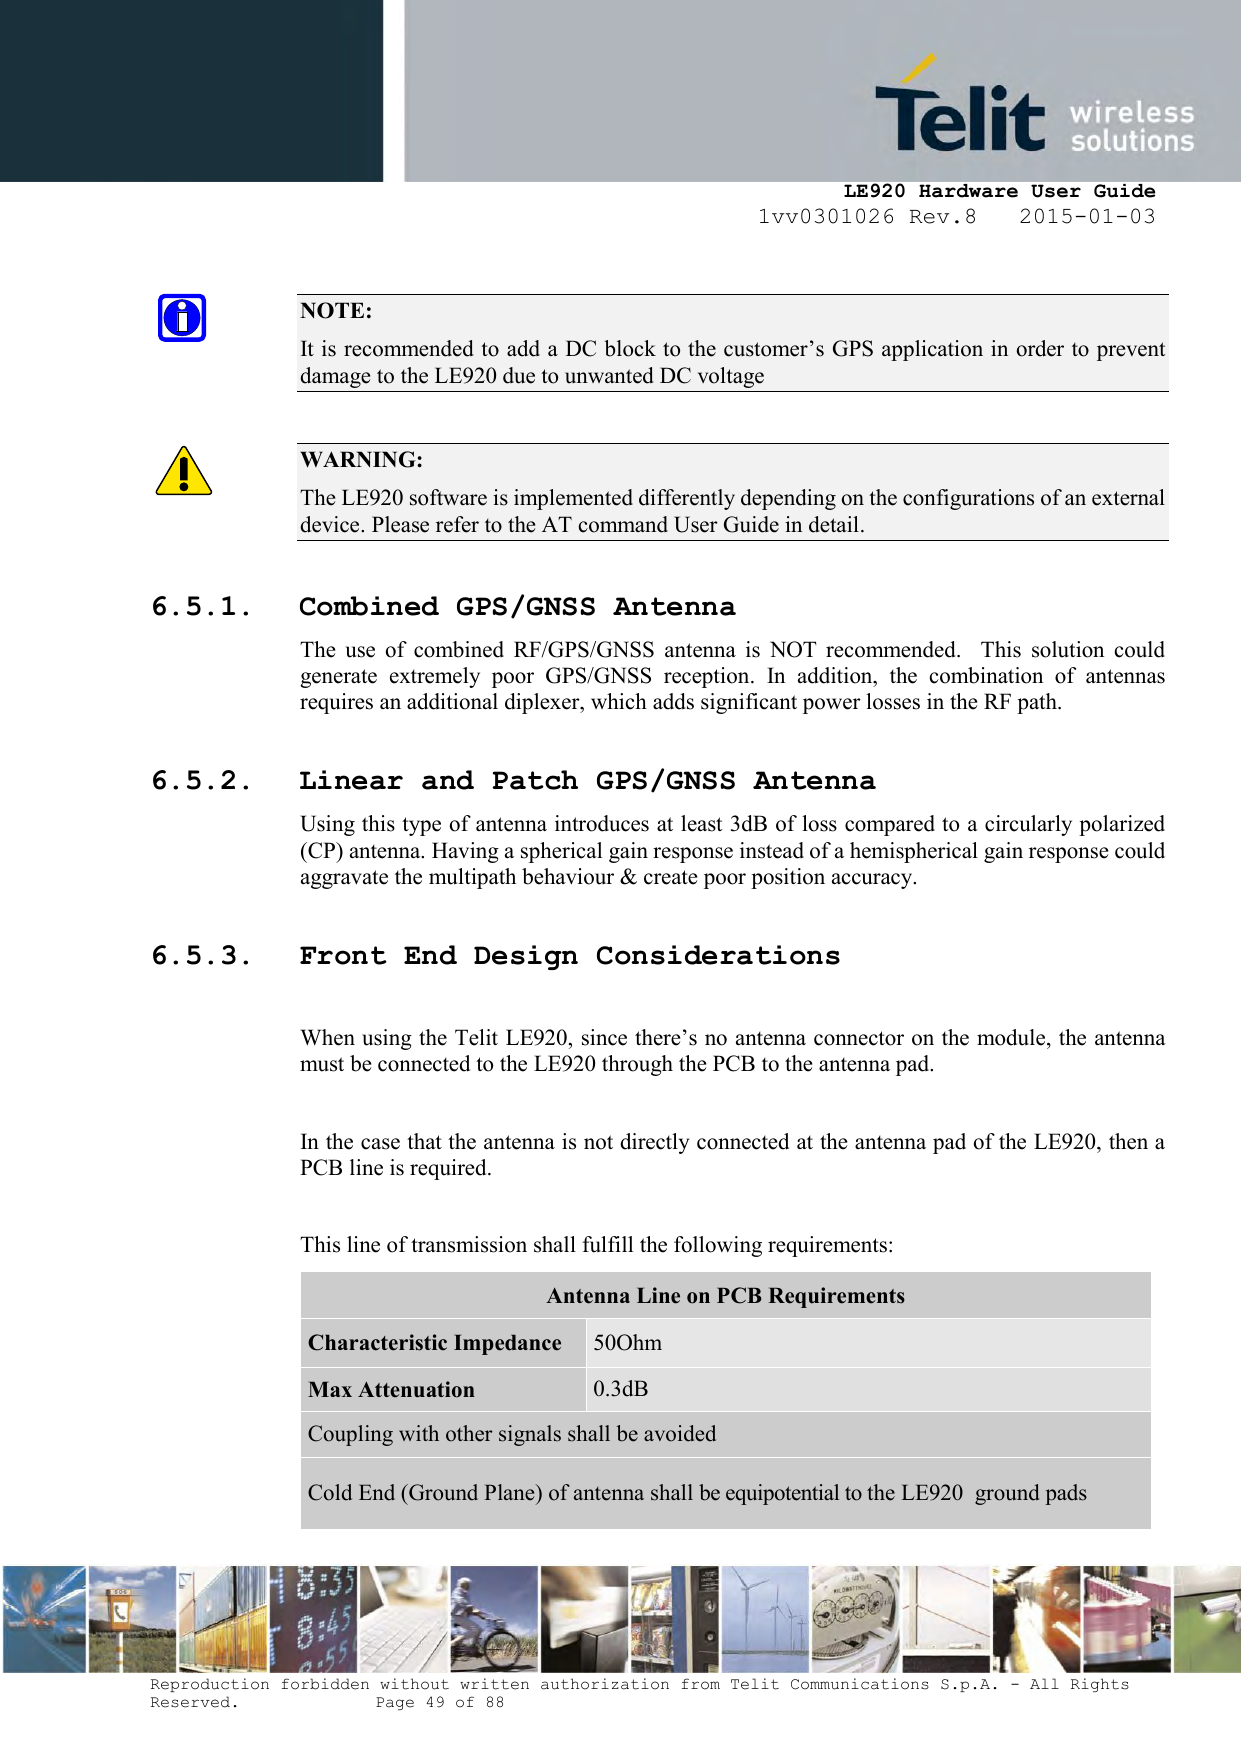     LE920 Hardware User Guide 1vv0301026 Rev.8   2015-01-03 Reproduction forbidden without written authorization from Telit Communications S.p.A. - All Rights Reserved.    Page 49 of 88   NOTE: It is recommended to add a DC block to the customer’s GPS application in order to prevent damage to the LE920 due to unwanted DC voltage  WARNING: The LE920 software is implemented differently depending on the configurations of an external device. Please refer to the AT command User Guide in detail. 6.5.1. Combined GPS/GNSS Antenna The  use  of  combined  RF/GPS/GNSS  antenna  is  NOT  recommended.    This  solution  could generate  extremely  poor  GPS/GNSS  reception.  In  addition,  the  combination  of  antennas requires an additional diplexer, which adds significant power losses in the RF path. 6.5.2. Linear and Patch GPS/GNSS Antenna Using this type of antenna introduces at least 3dB of loss compared to a circularly polarized (CP) antenna. Having a spherical gain response instead of a hemispherical gain response could aggravate the multipath behaviour &amp; create poor position accuracy. 6.5.3. Front End Design Considerations  When using the Telit LE920, since there’s no antenna connector on the module, the antenna must be connected to the LE920 through the PCB to the antenna pad.   In the case that the antenna is not directly connected at the antenna pad of the LE920, then a PCB line is required.  This line of transmission shall fulfill the following requirements: Antenna Line on PCB Requirements Characteristic Impedance 50Ohm Max Attenuation 0.3dB Coupling with other signals shall be avoided Cold End (Ground Plane) of antenna shall be equipotential to the LE920  ground pads  